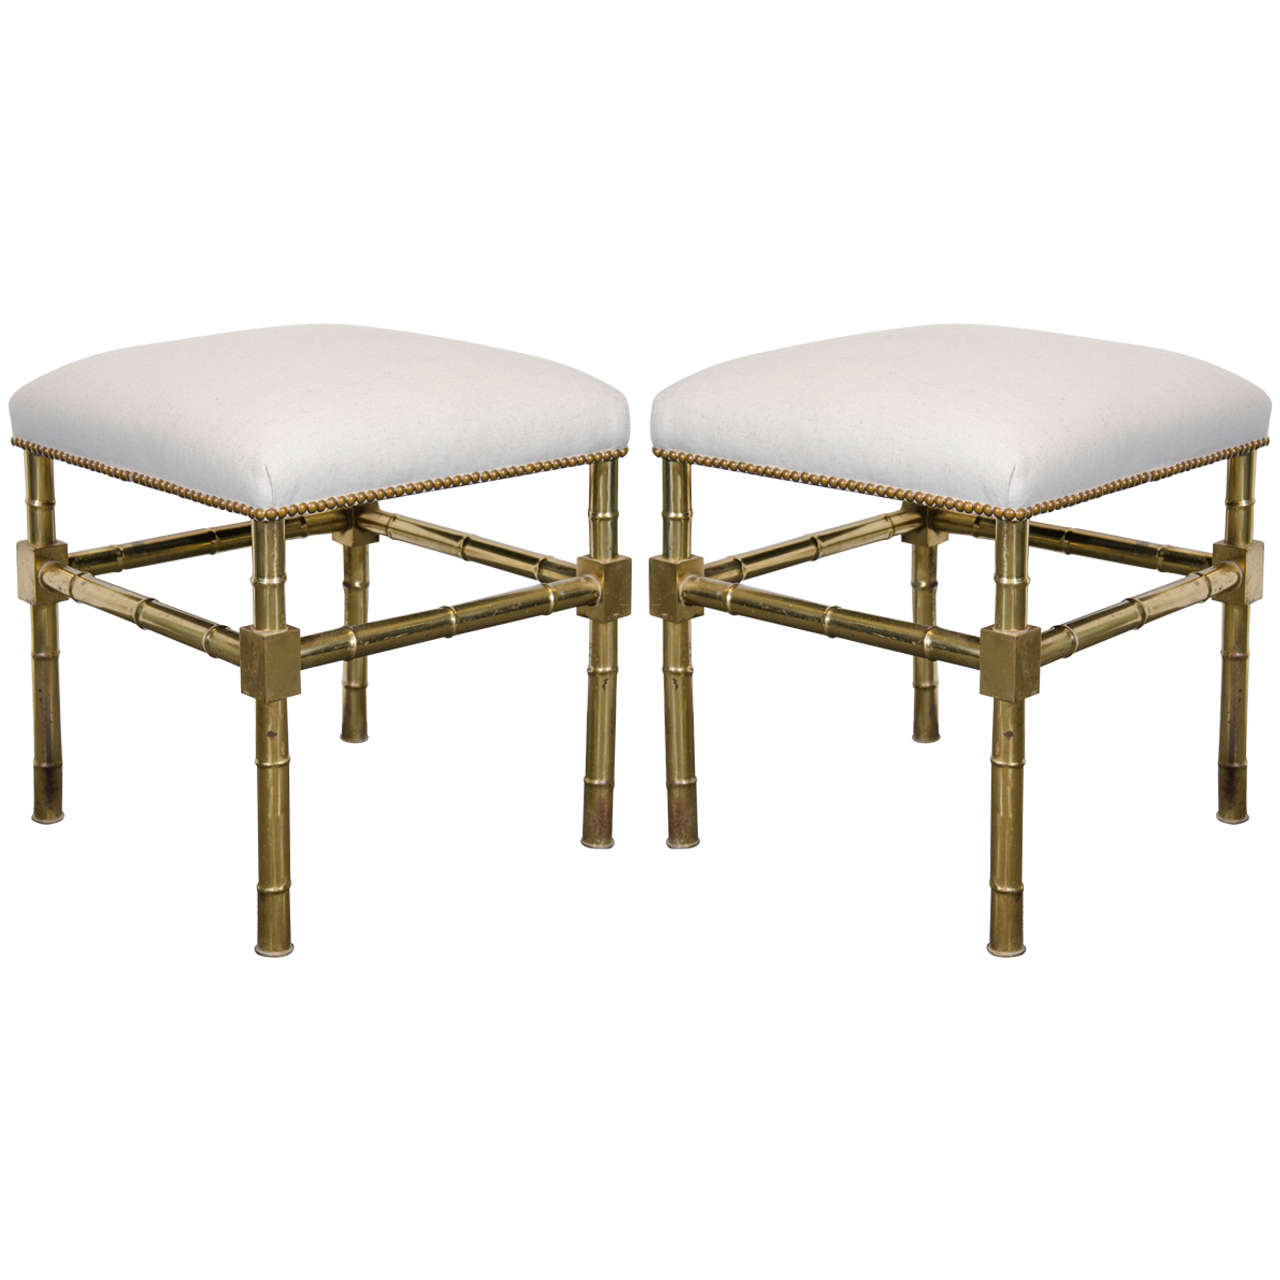 A Pair of Midcentury Italian Faux Bamboo Brass Stools